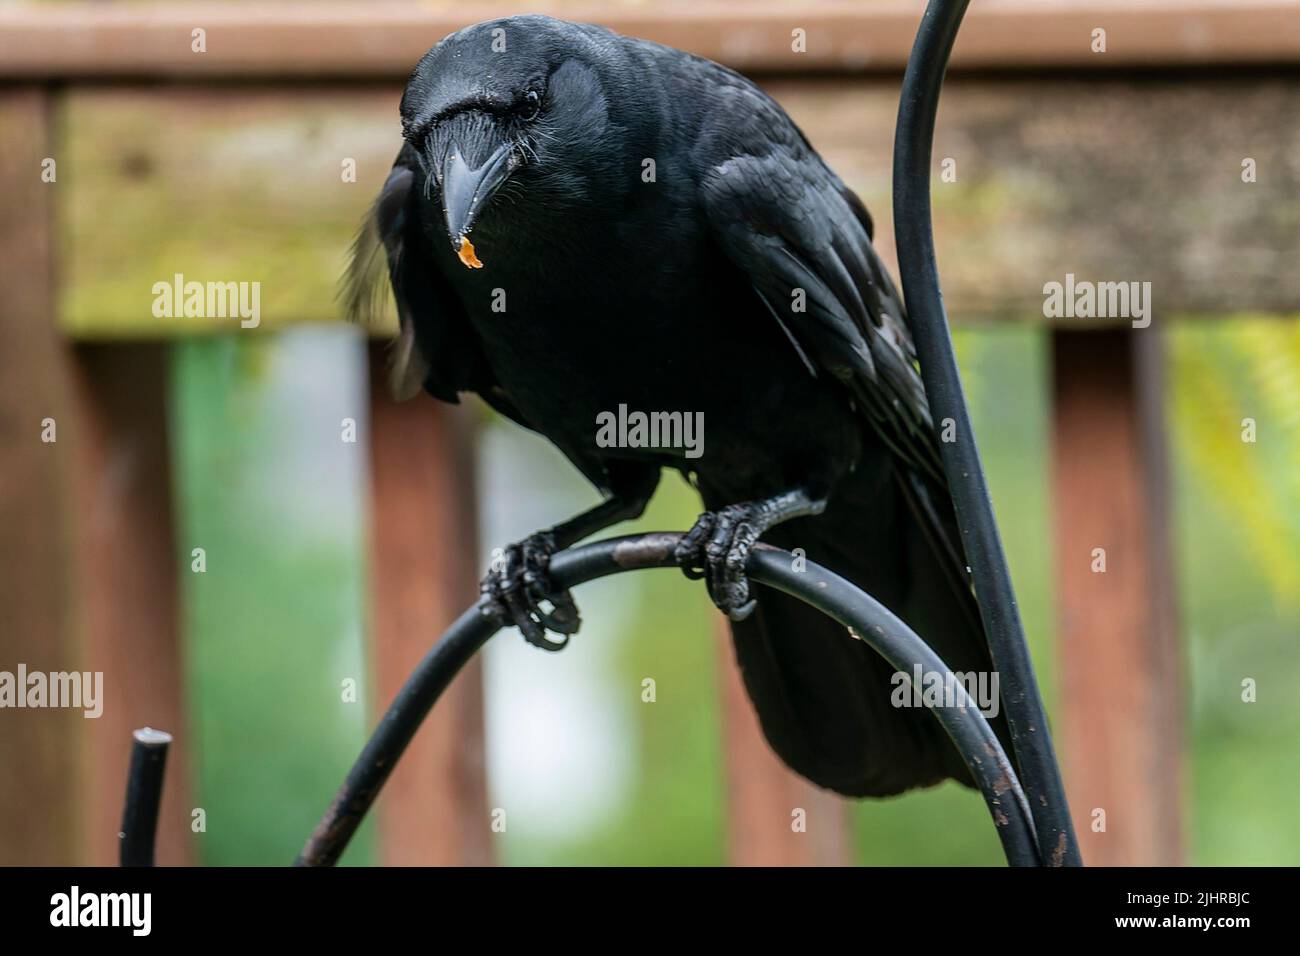 Large Black bird on a curved metal bar Stock Photo